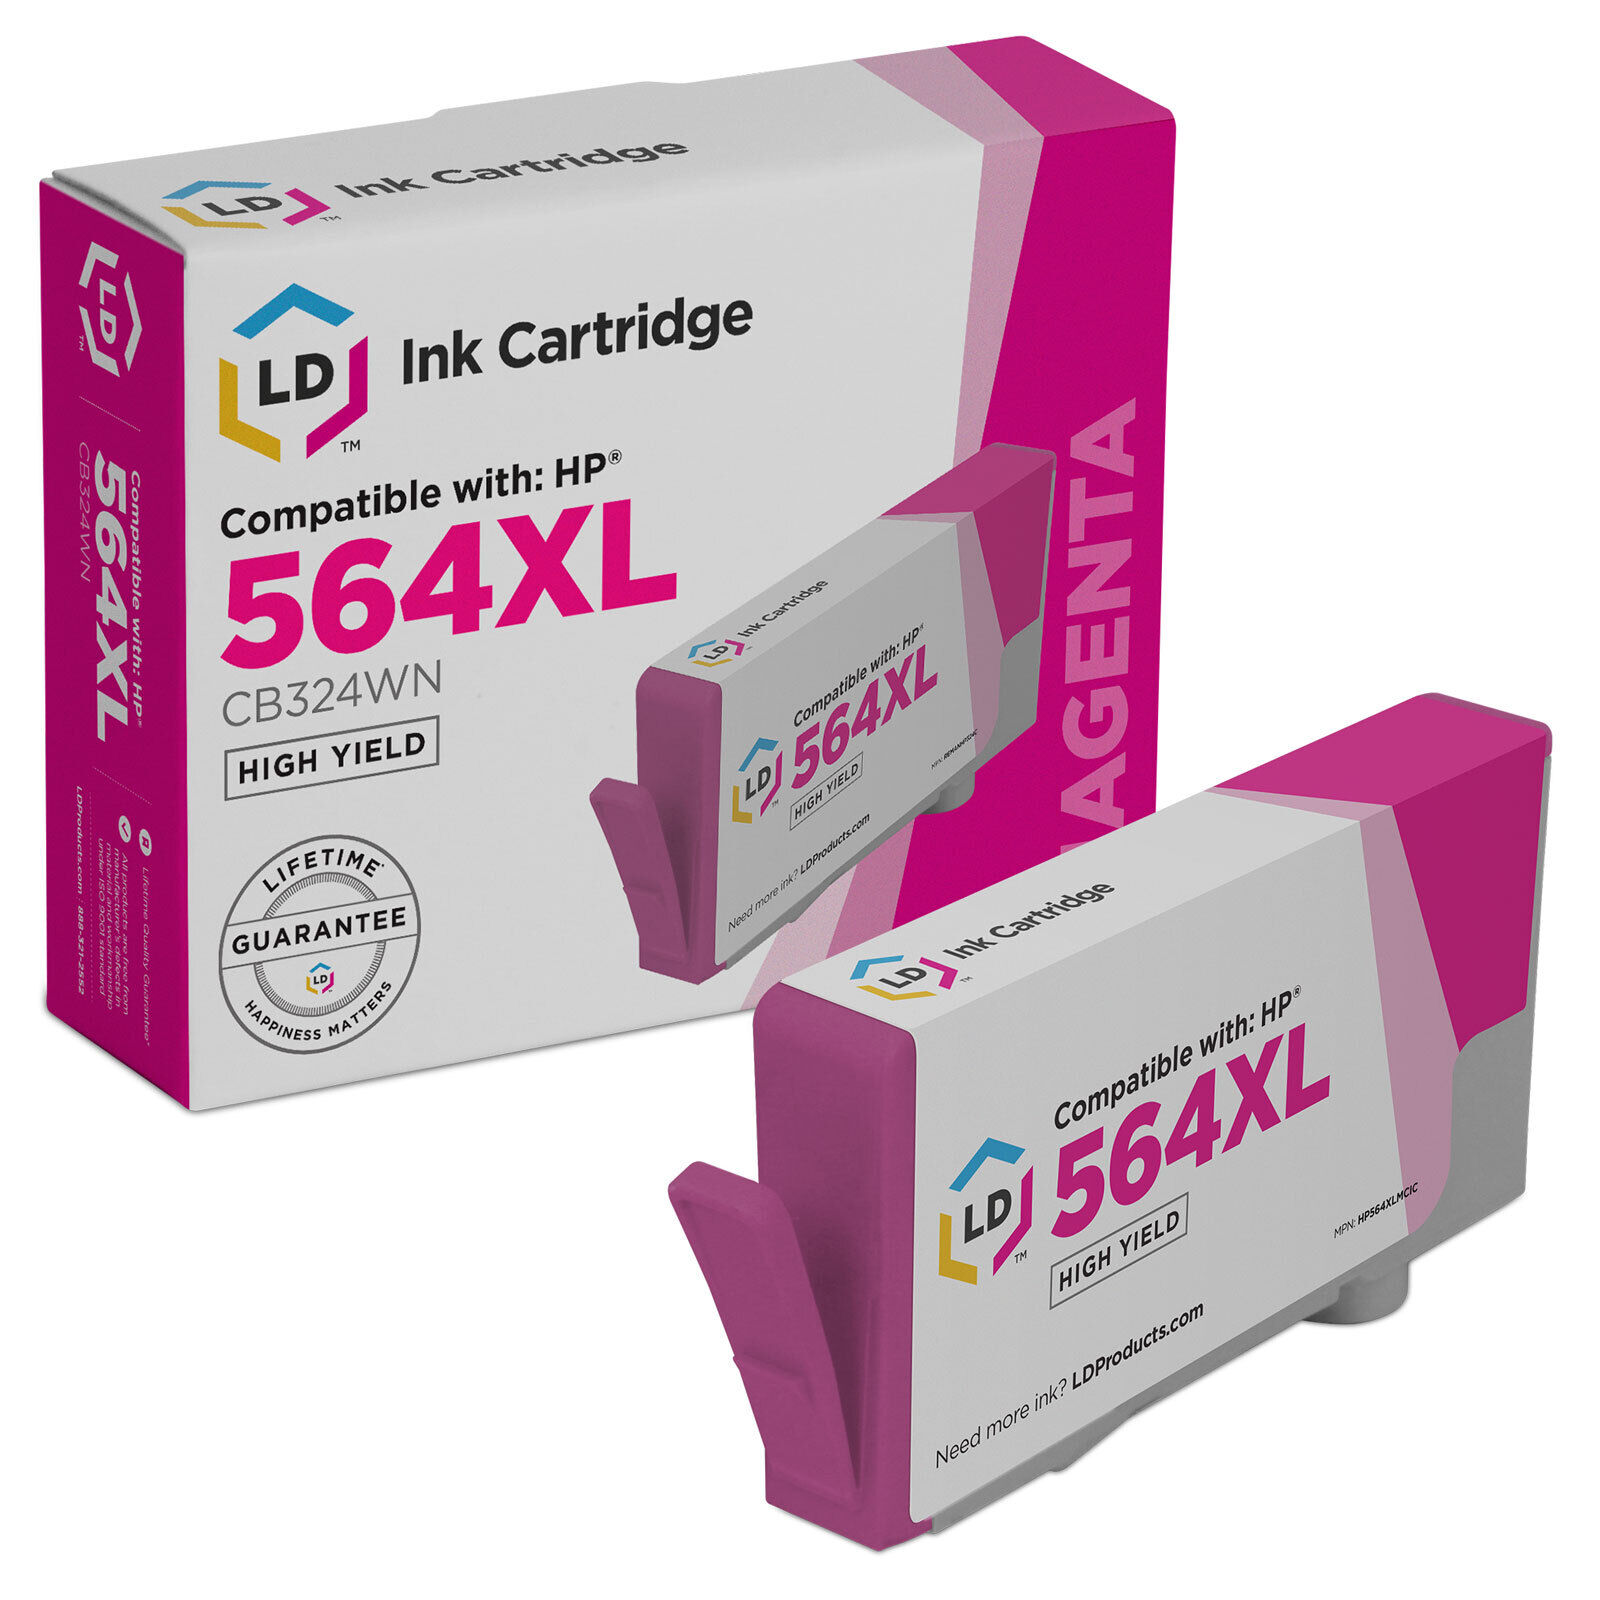 LD Compatible 564XL CB324WN HY Magenta Ink Cartridge for HP 7510 7515 B109 B8500